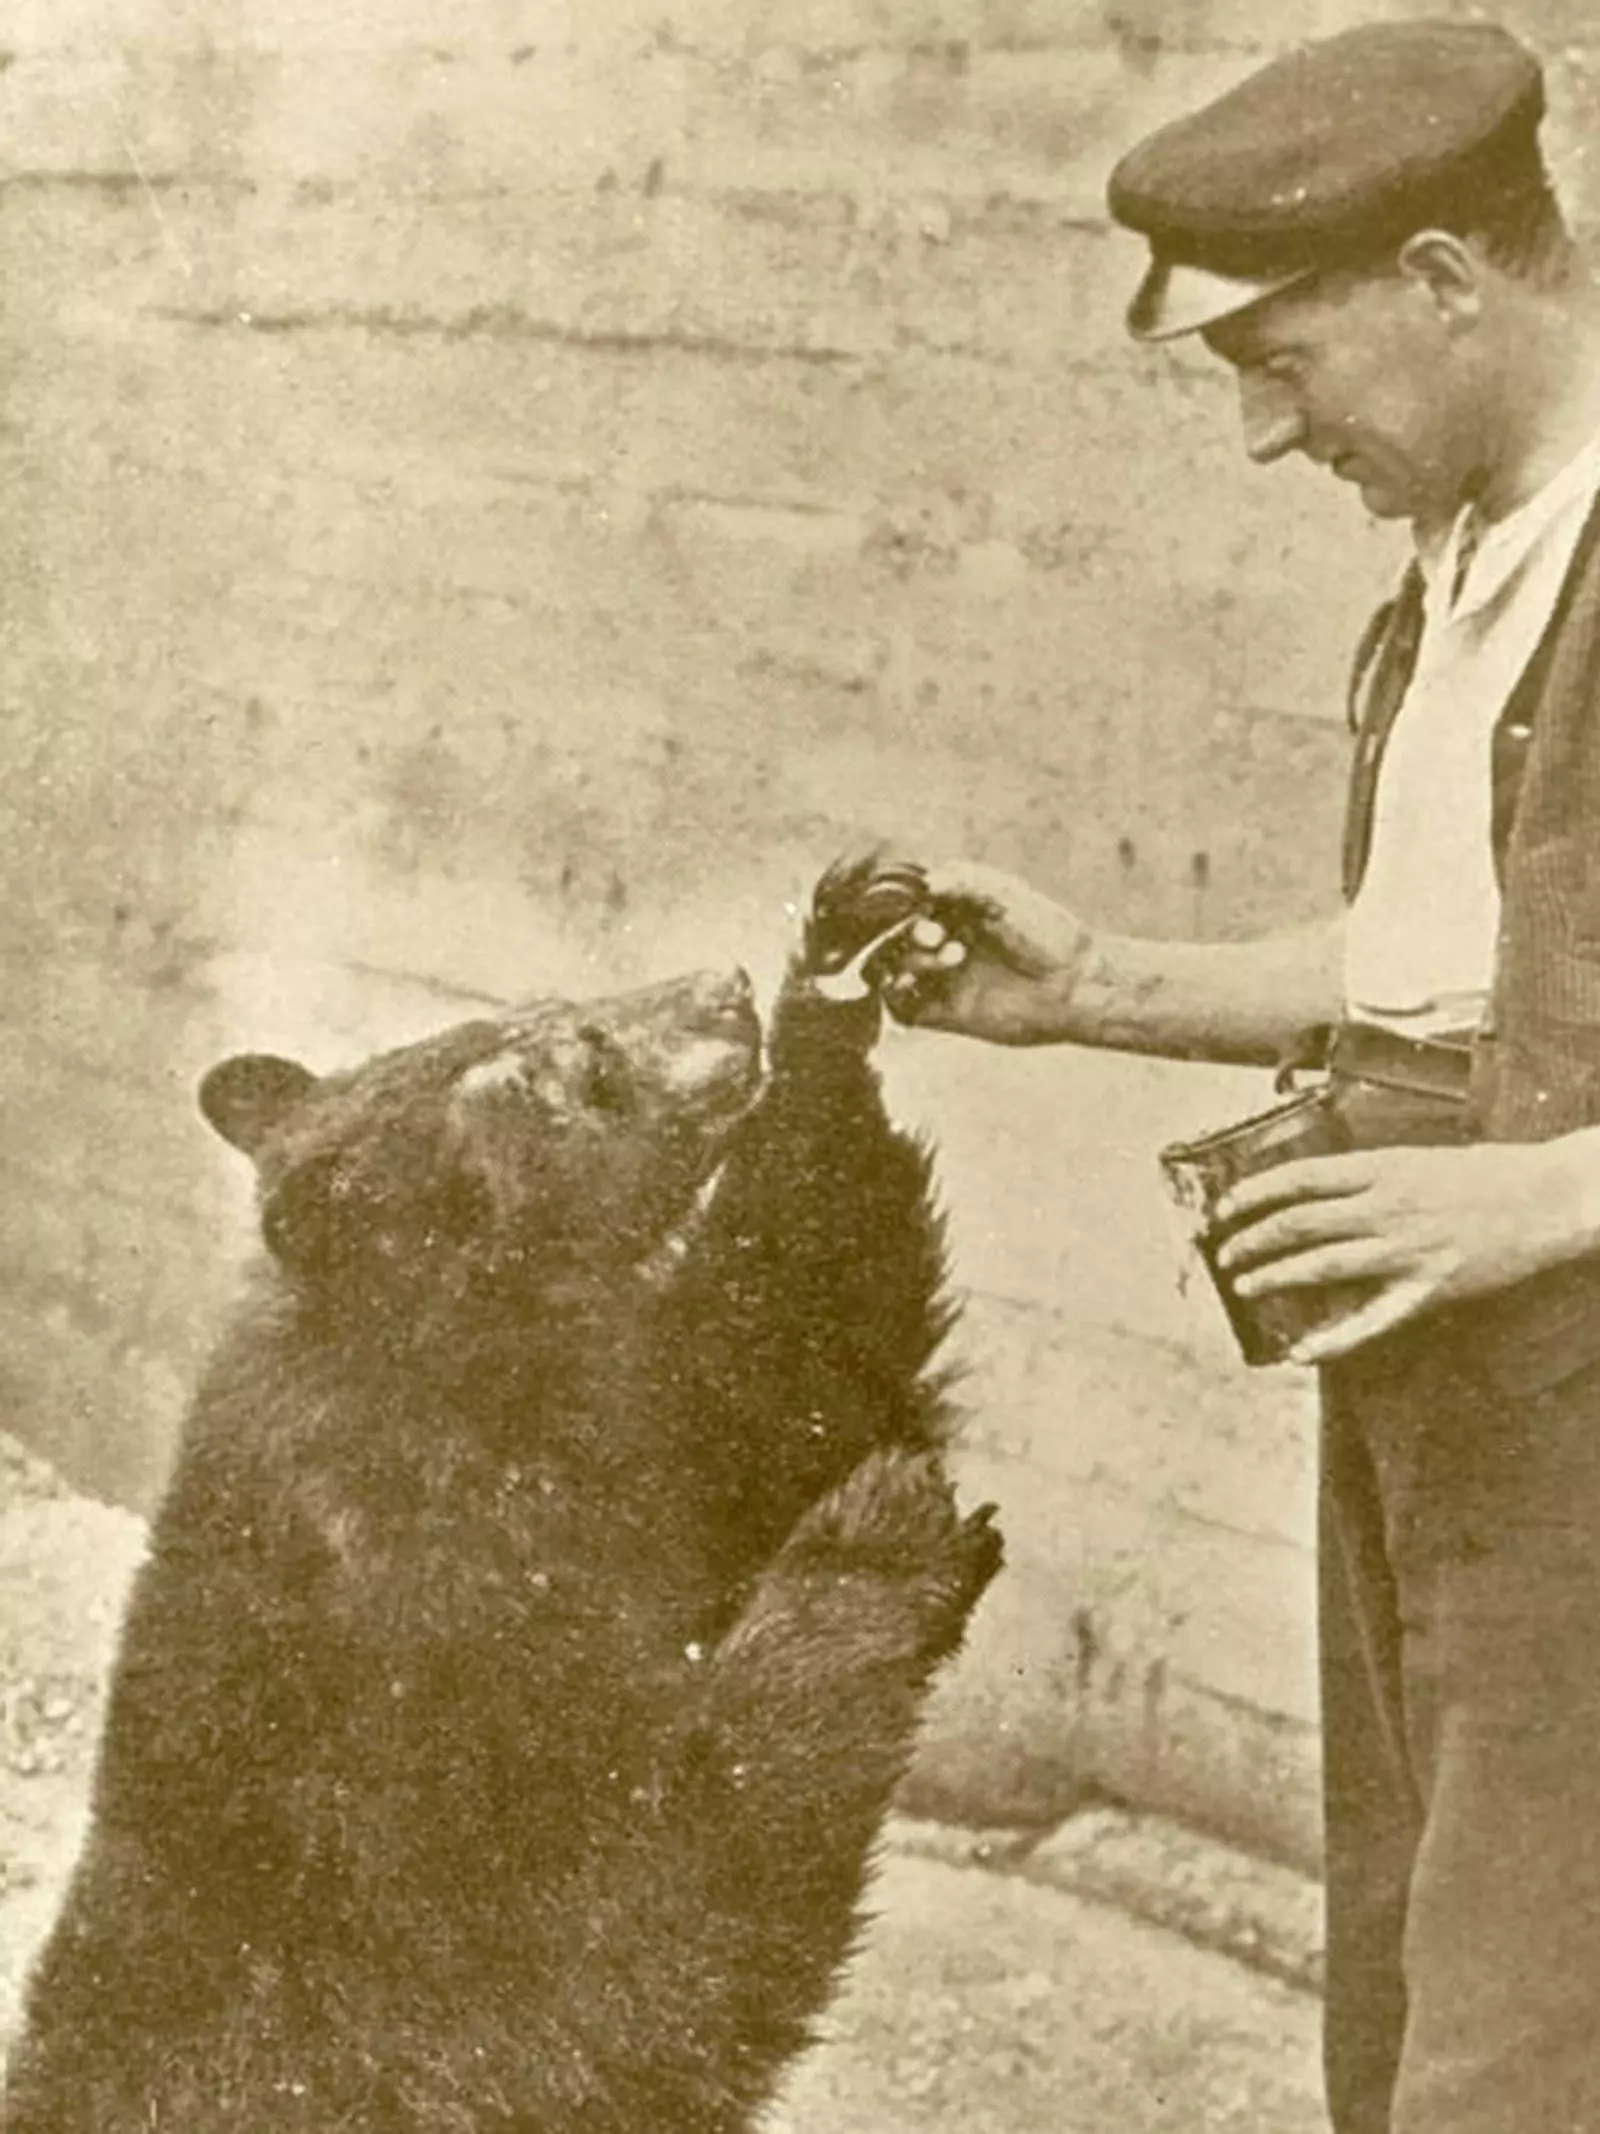 Winnie the bear at London Zoo which inspired Winnie the Pooh